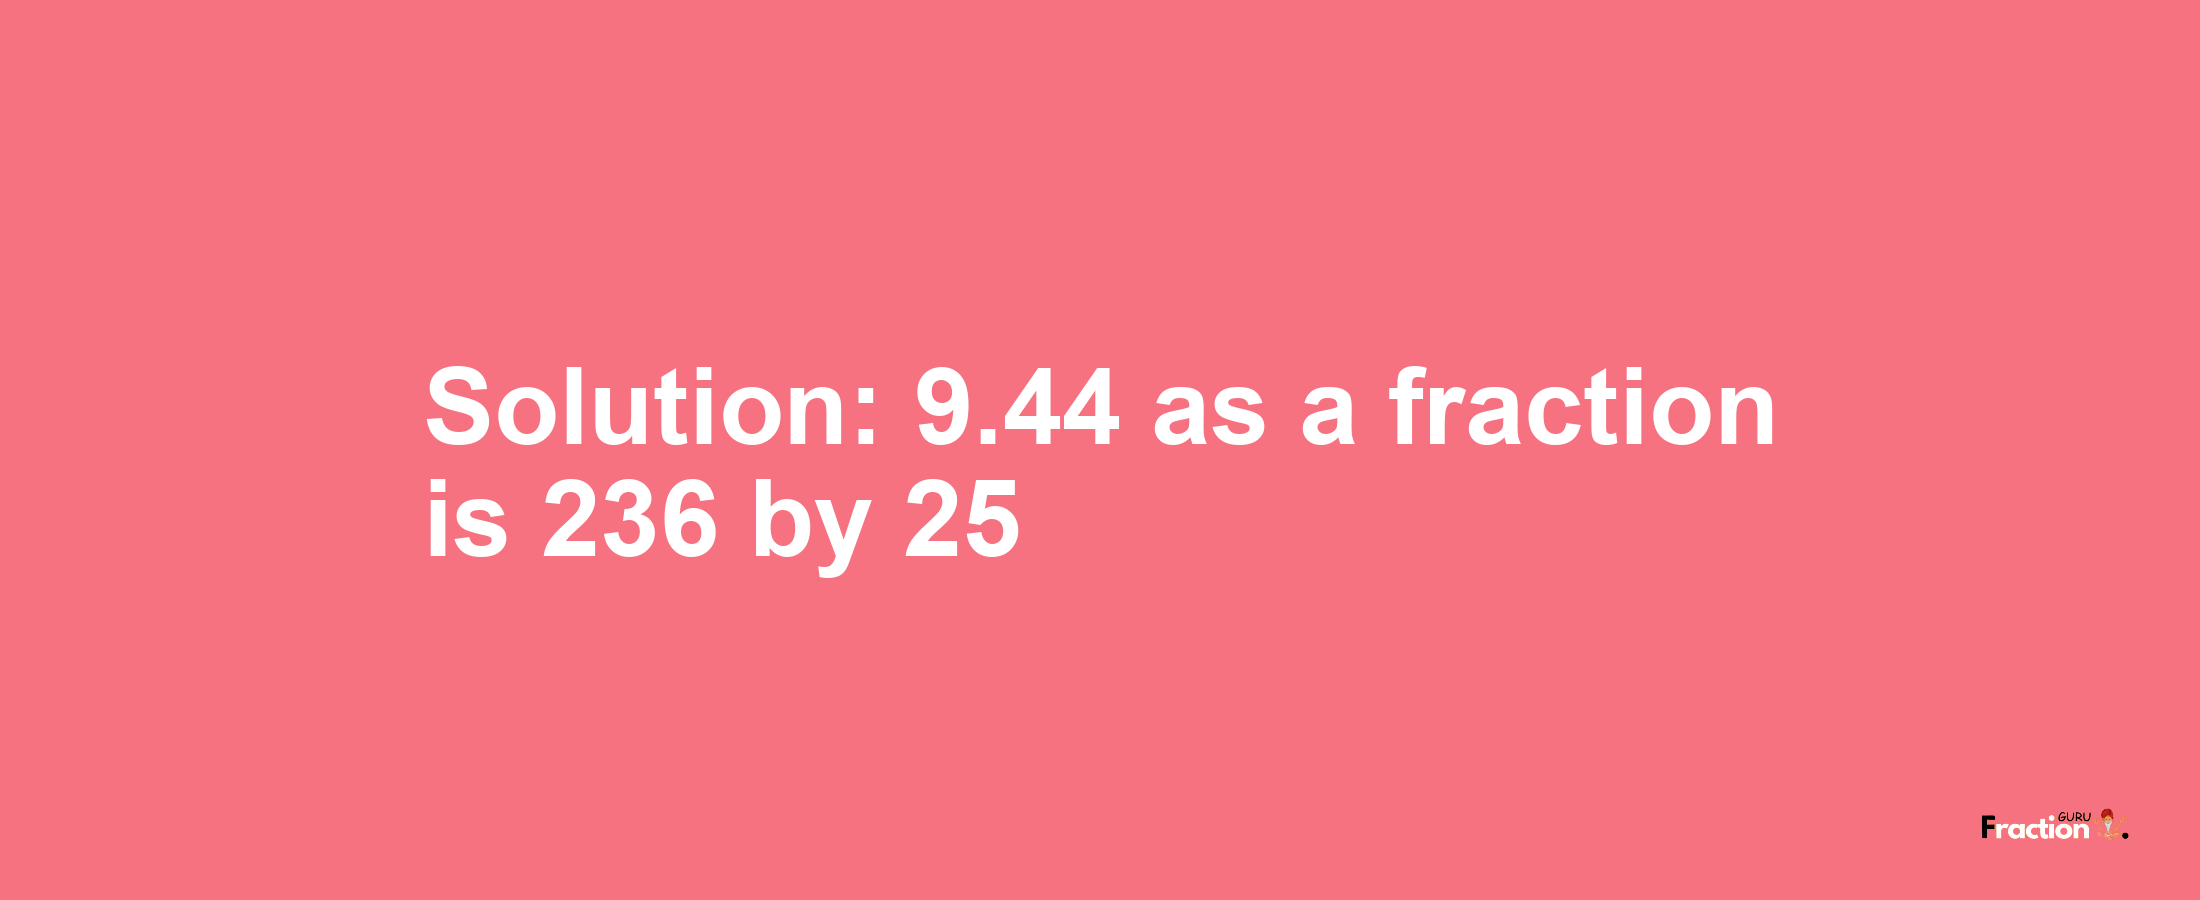 Solution:9.44 as a fraction is 236/25